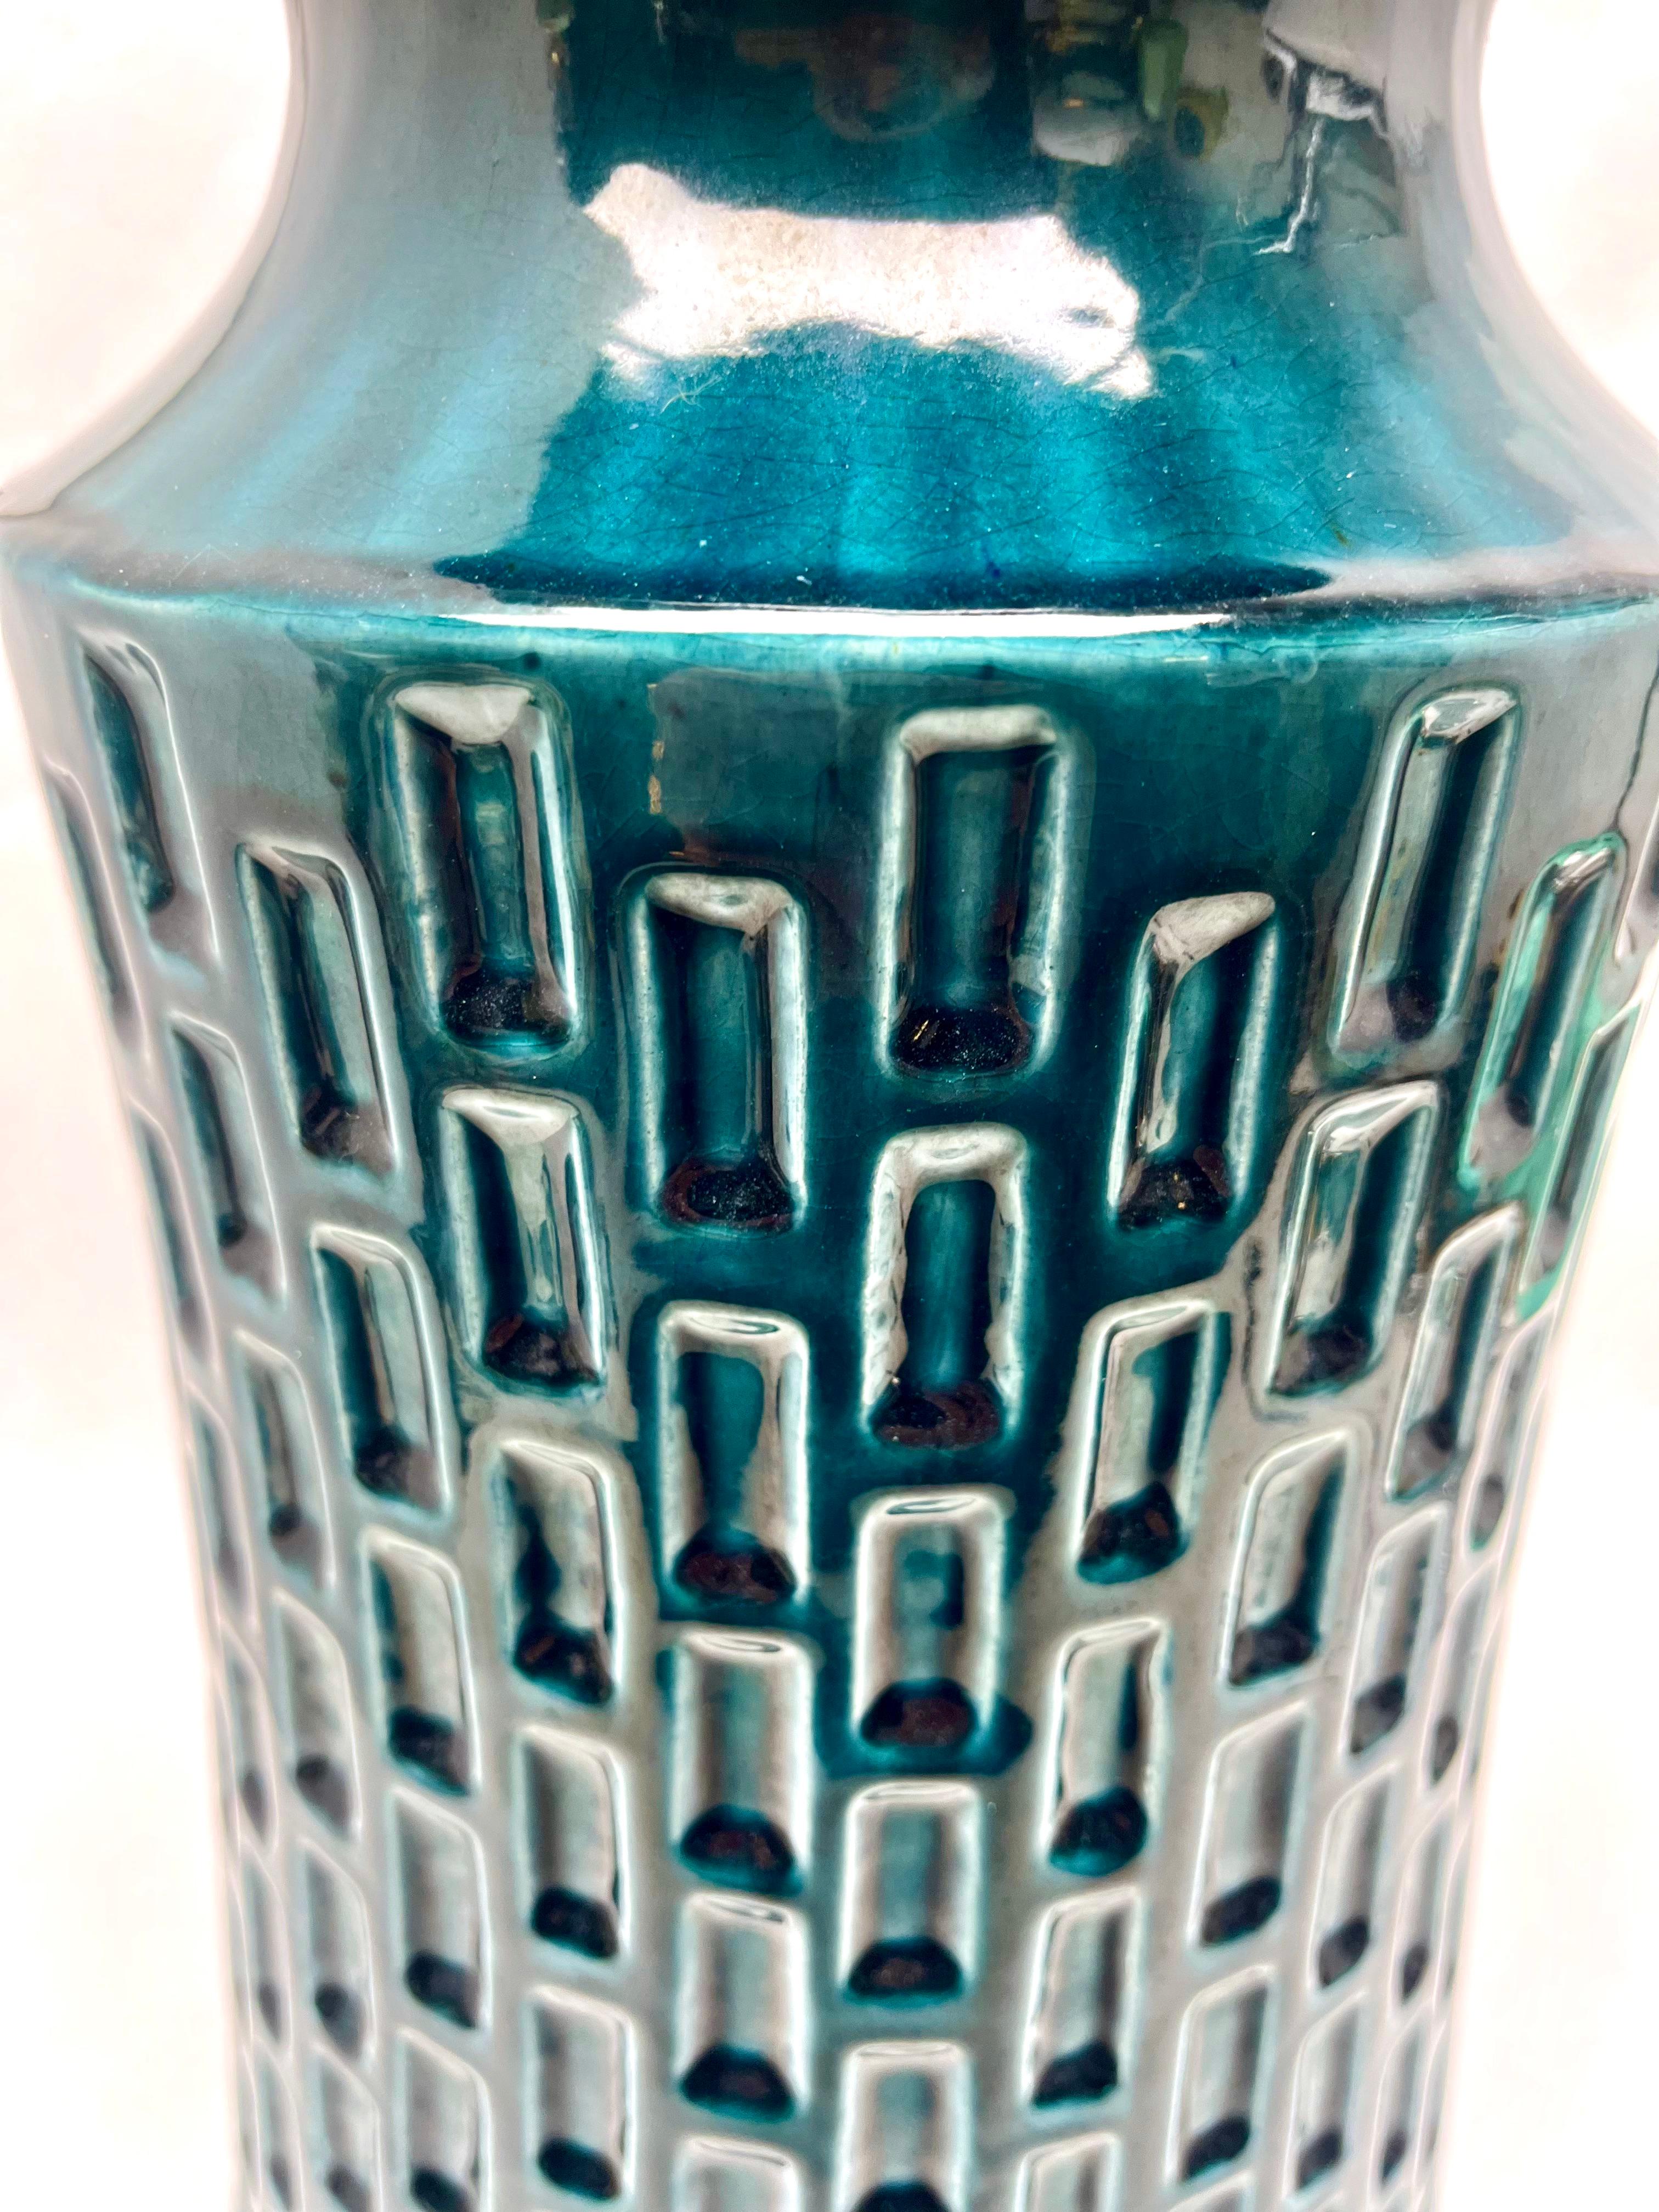 Vintage Jasba vase in blue drip glaze featuring the indented
On close inspection the glaze includes flecks black and sea-blue which give greater depth to the surfaces.

Please don't hesitate to get in touch with any further questions.  
With best